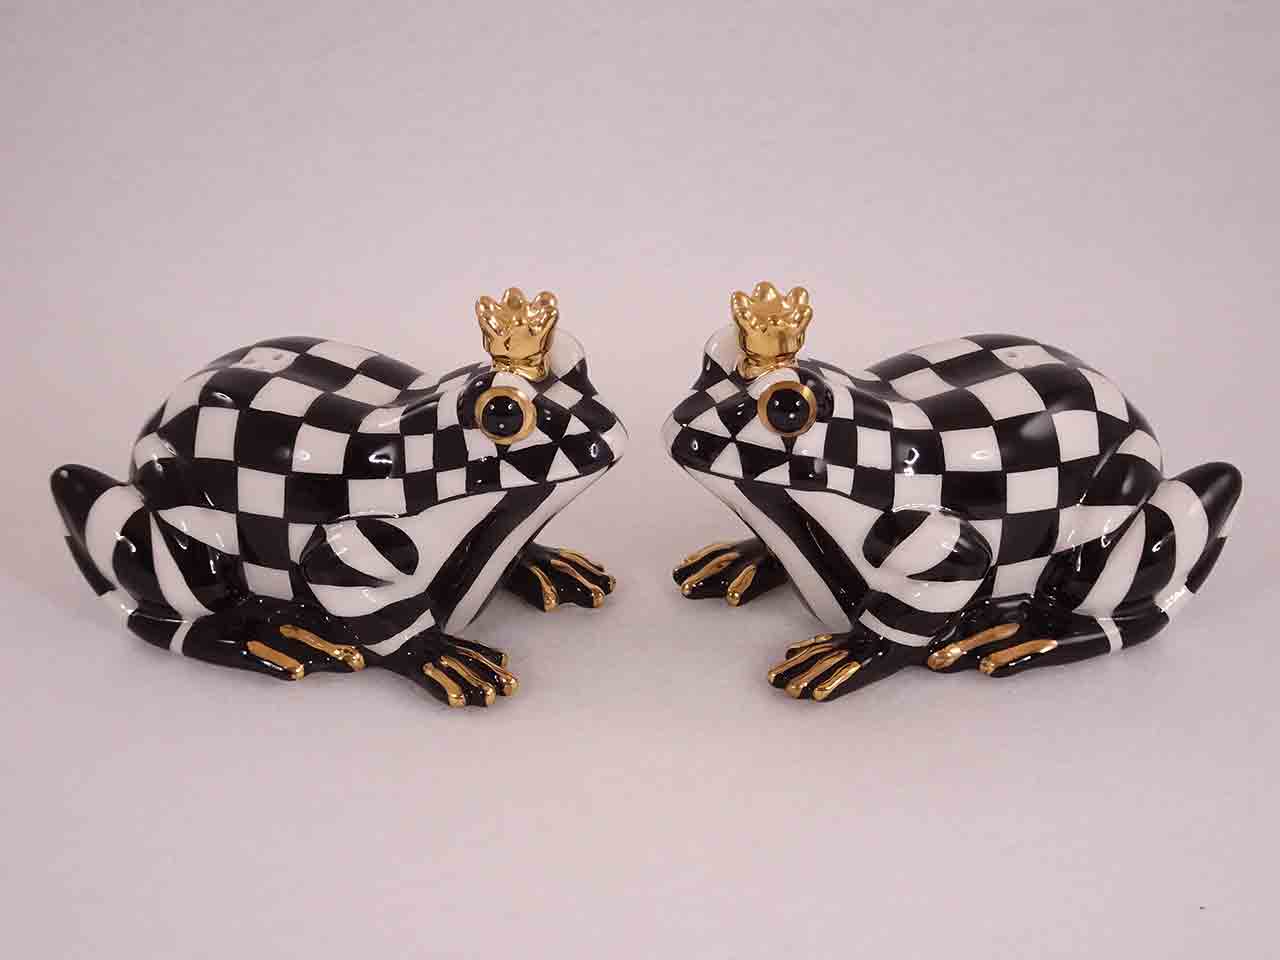 MacKenzie-Childs frog prince salt and pepper shakers